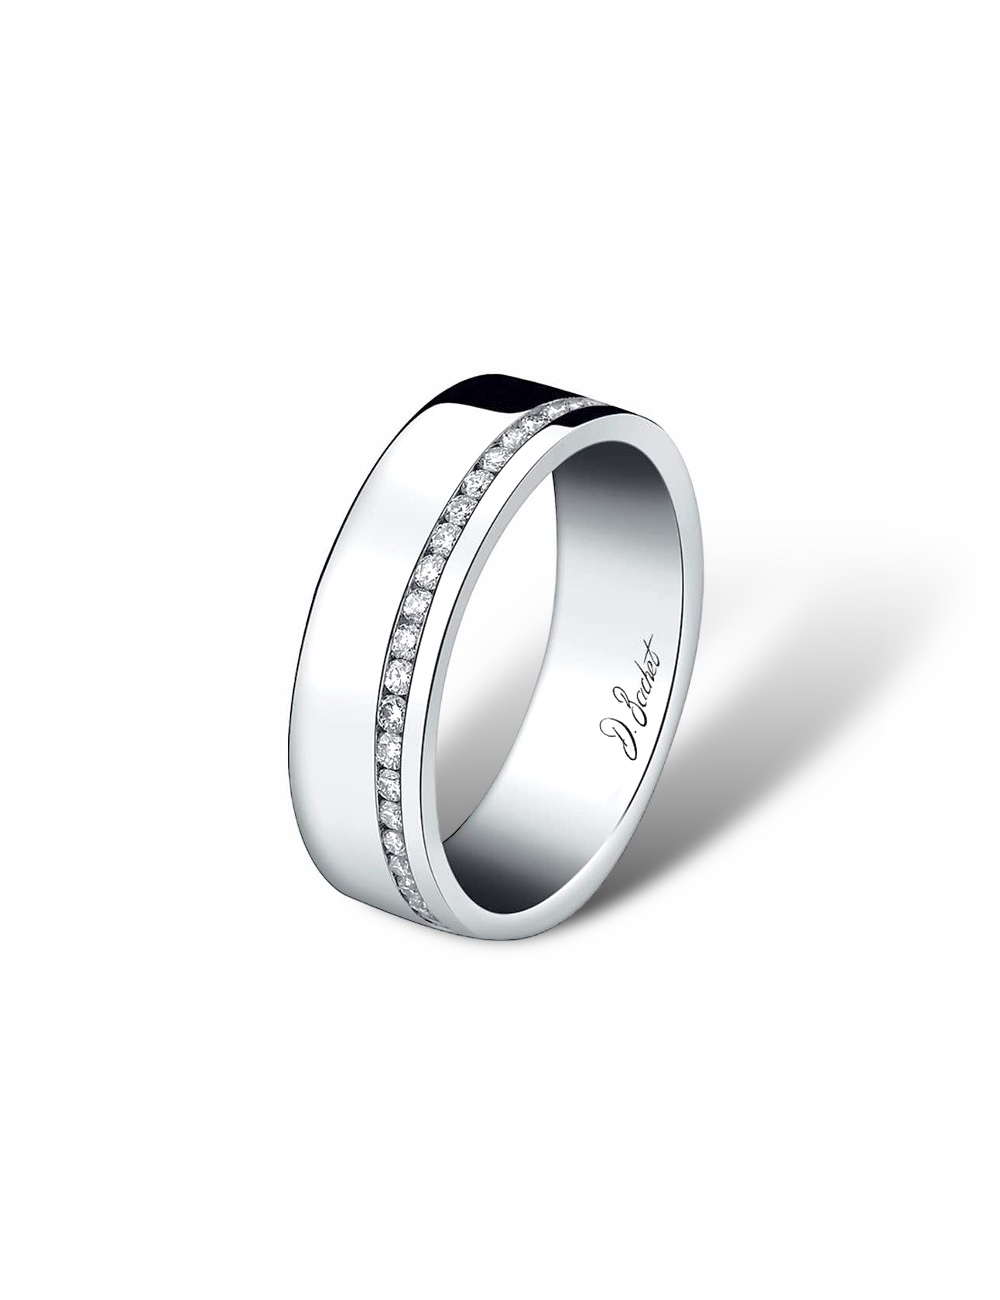 Unique 6mm wide wedding band breaking tradition with a powerful, luminous design, perfect for daily wear.